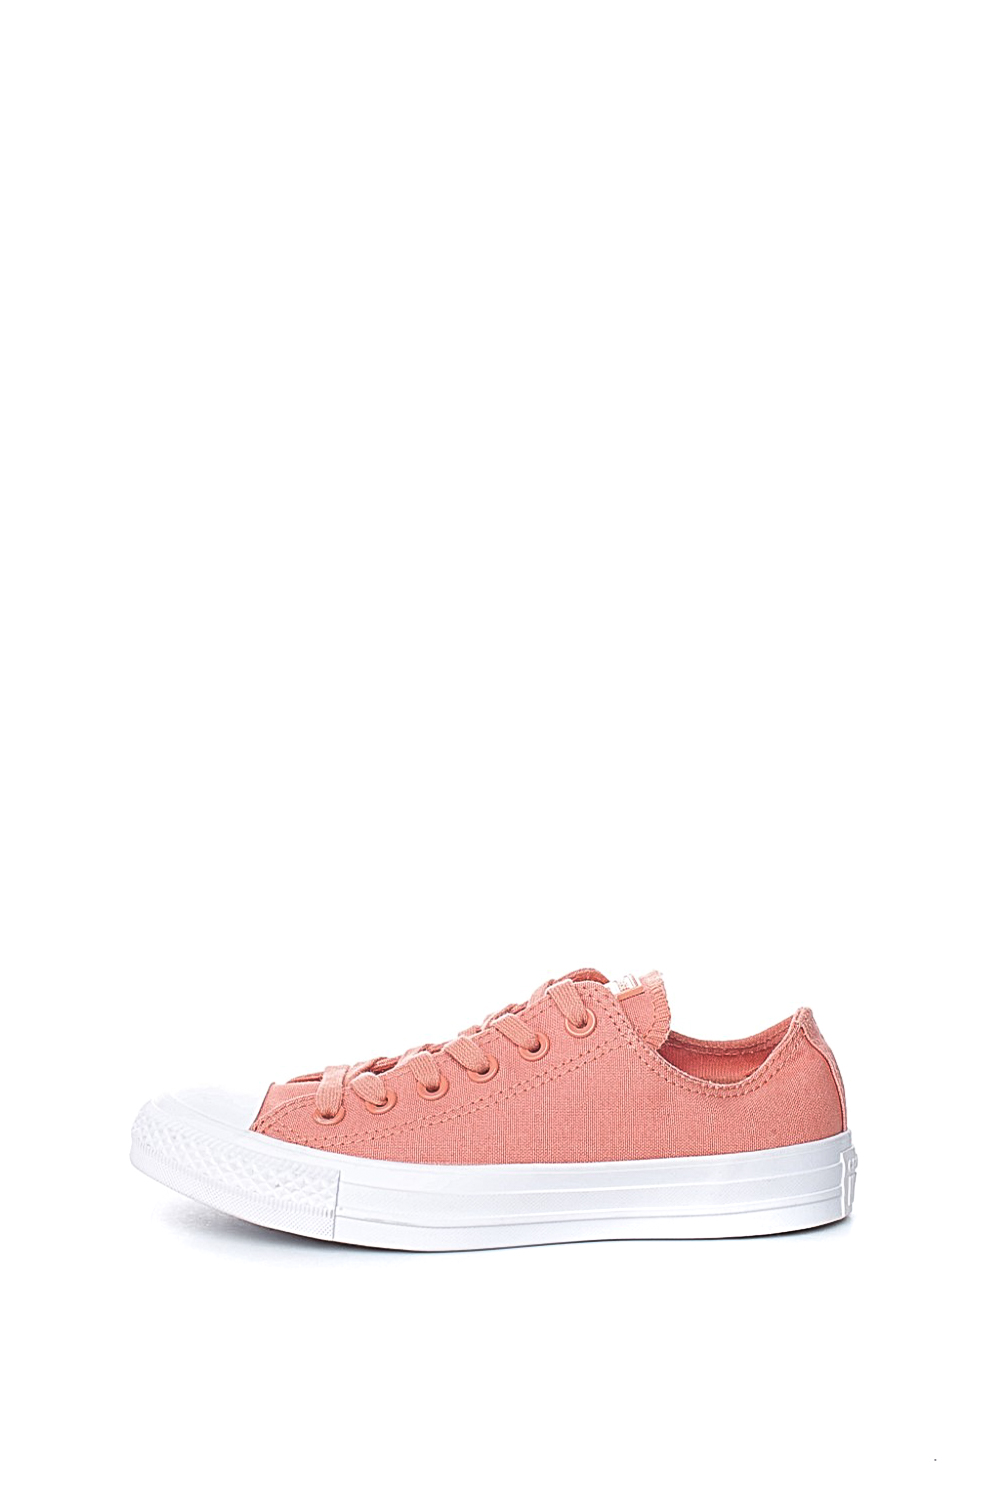 CONVERSE – Unisex sneakers CONVERSE Chuck Taylor All Star Ox ροζ